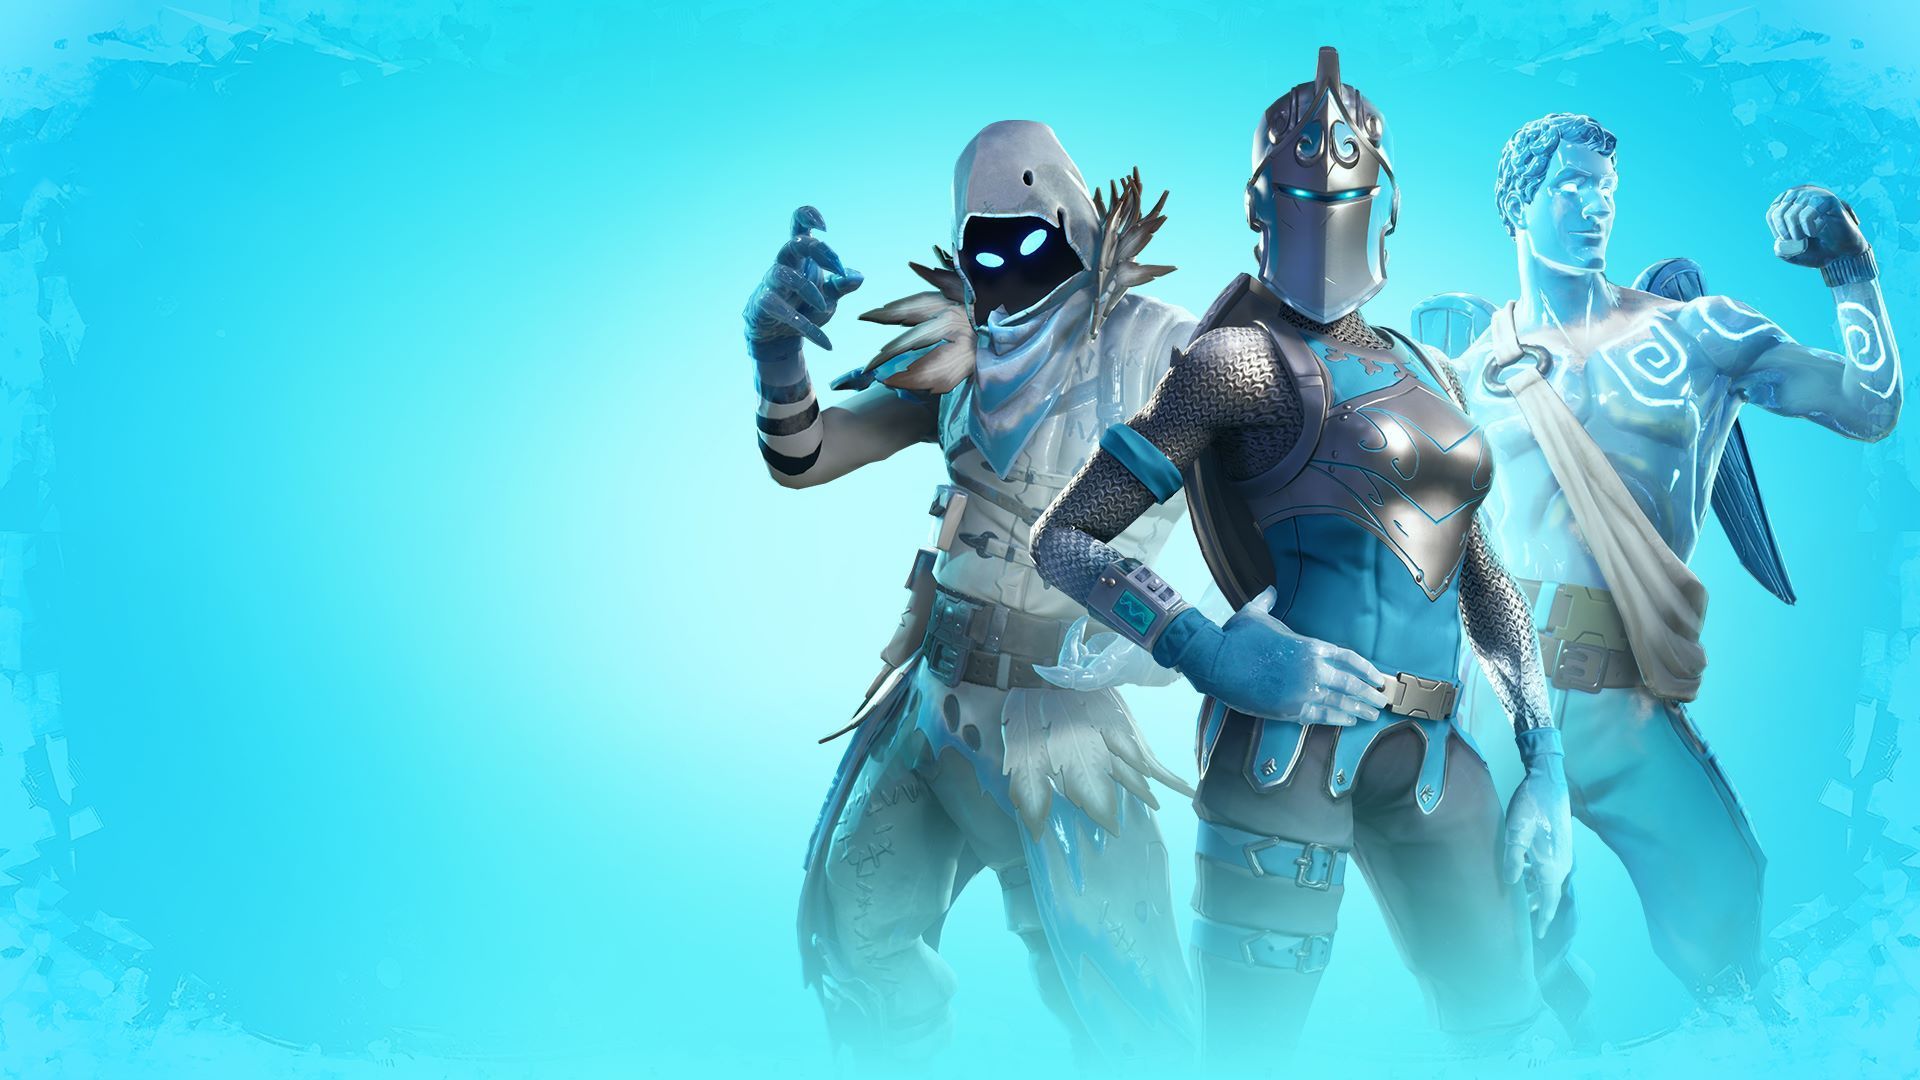 Free download The Fortnite Frozen Legends Pack brings new skins to